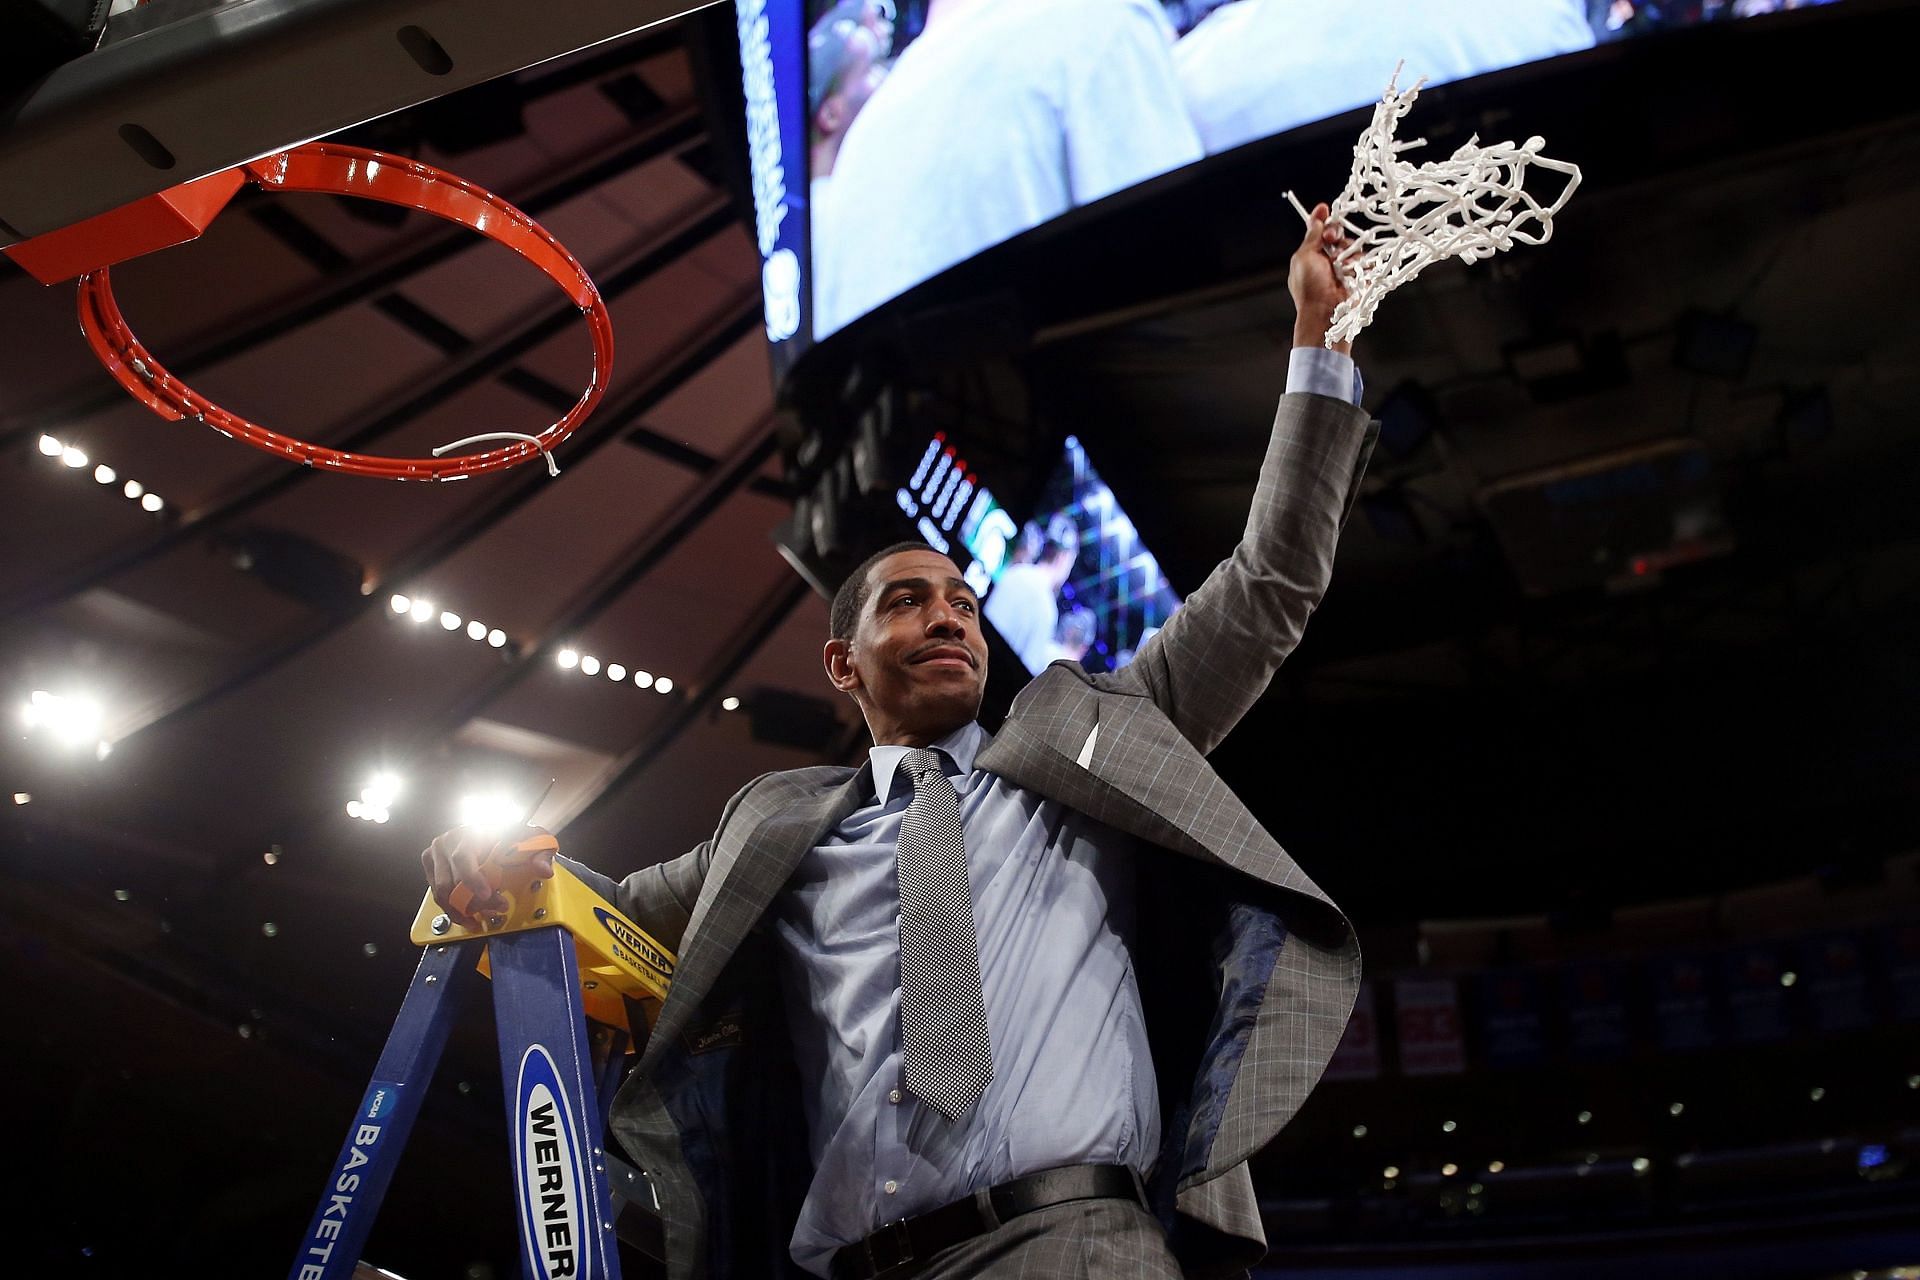 Ollie led UConn to national championship in 2014 (Image via Getty Images)